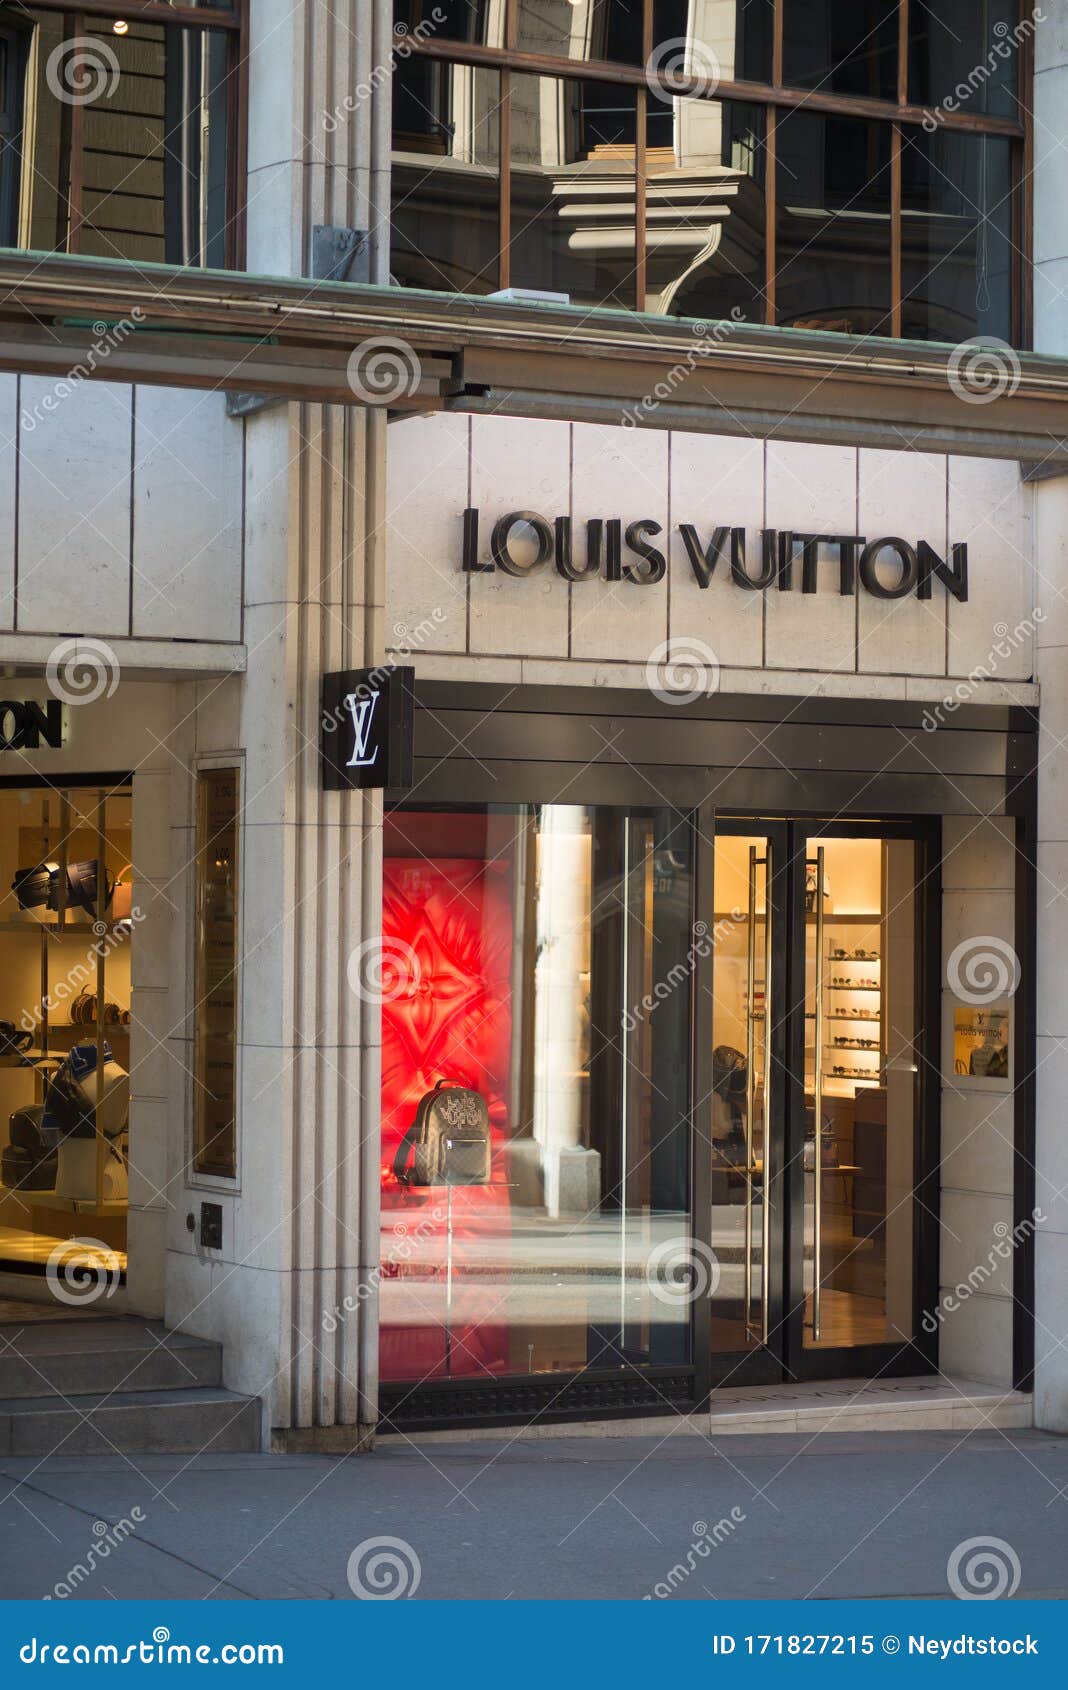 Louis Vuitton Store Showroom in the Street, Louis Vuitton is the